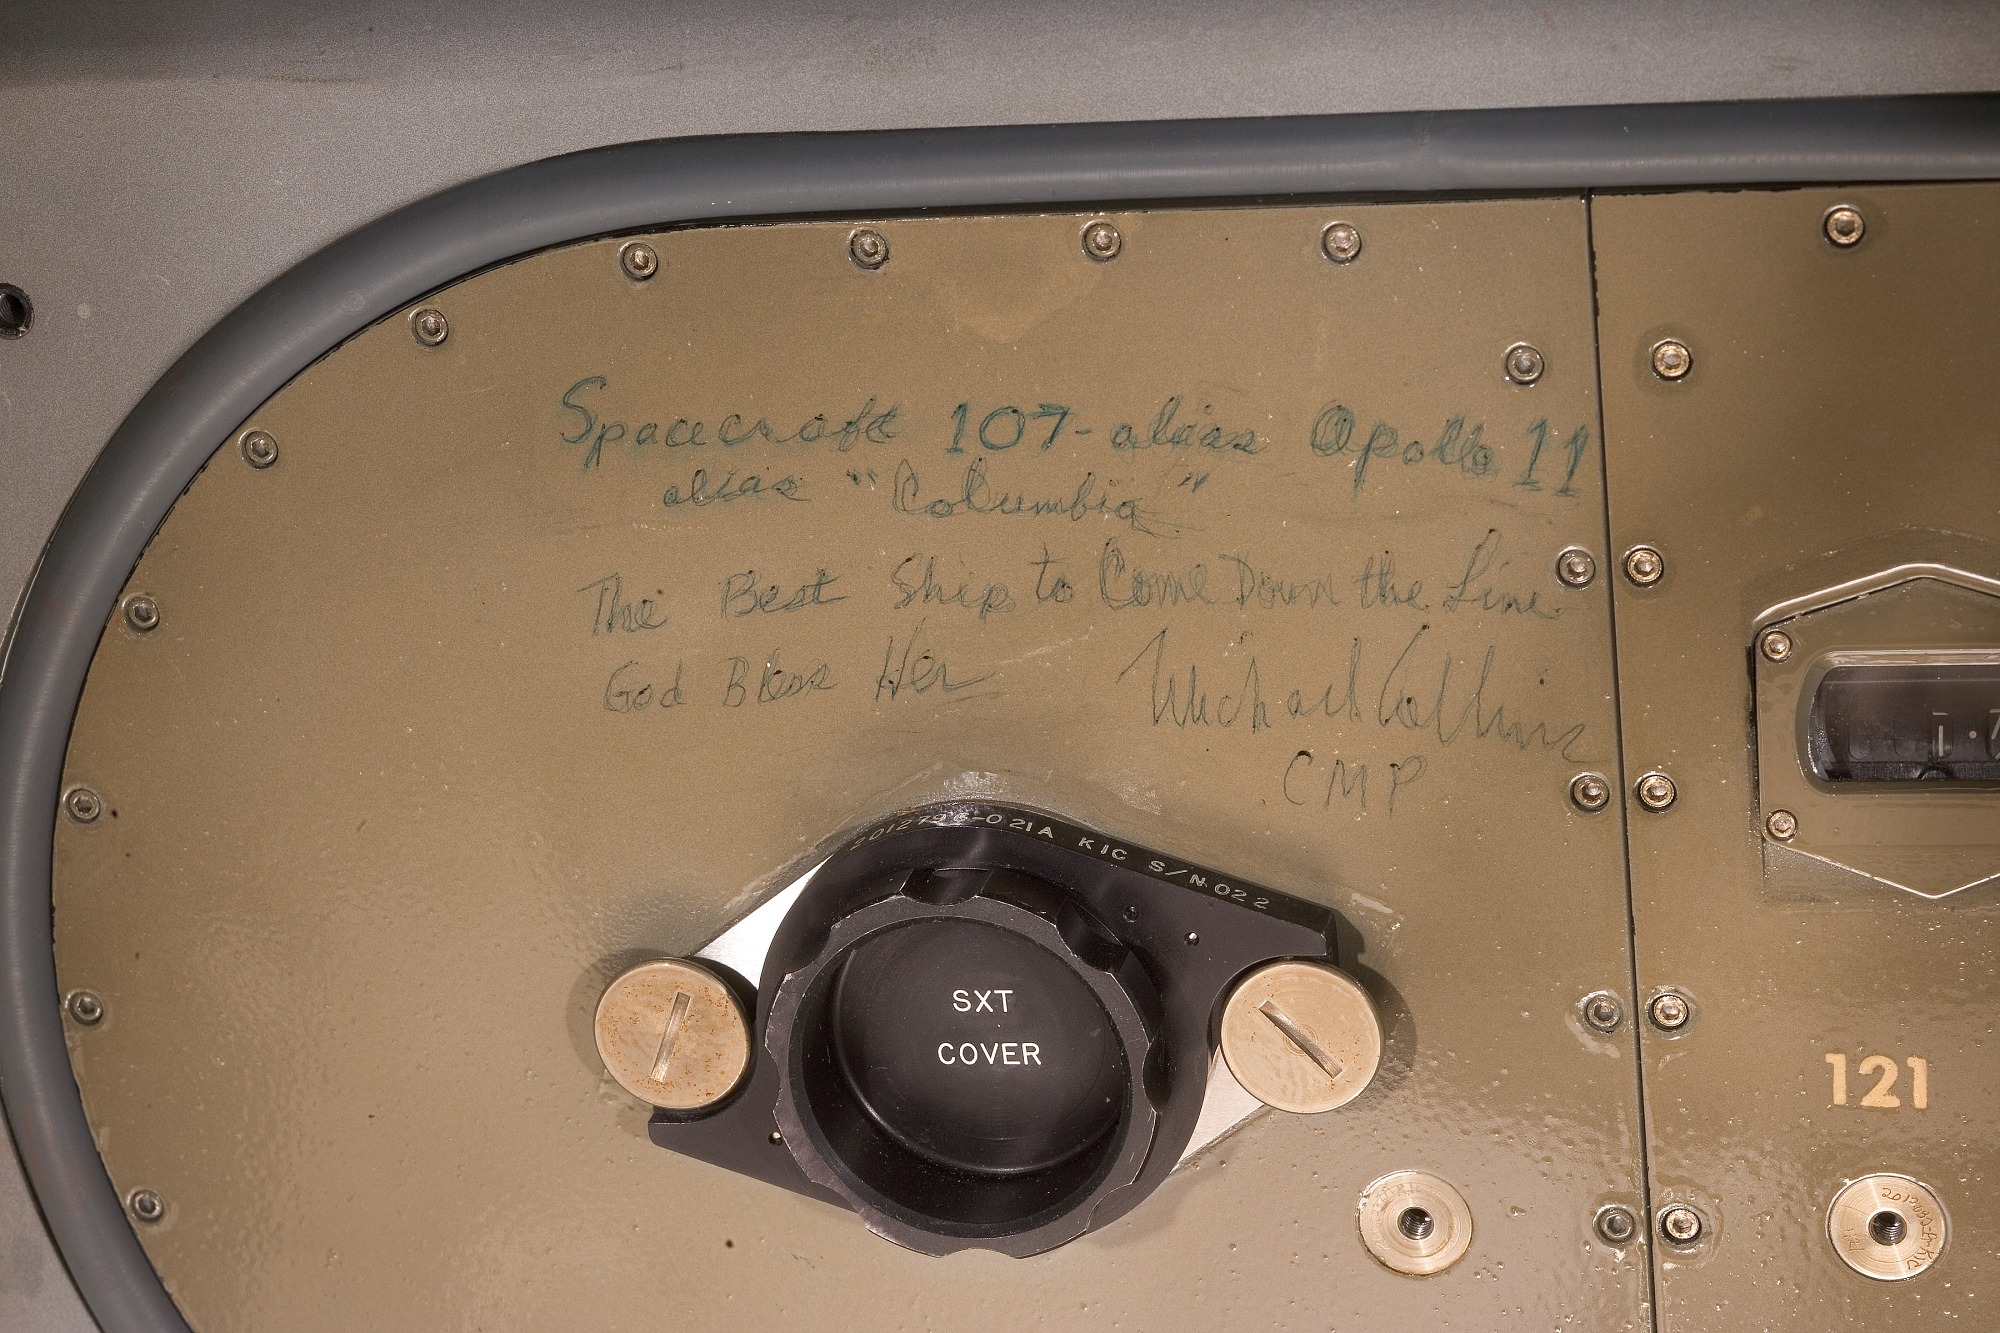 Metal panel with rivets around the edge. Handwritten text in green ink reads: ‘Spacecraft 107 – alias Apollo 11 / alias “Columbia” / The Best Ship to Come Down the Line / God Bless Her / Michael Collins / CMP’.